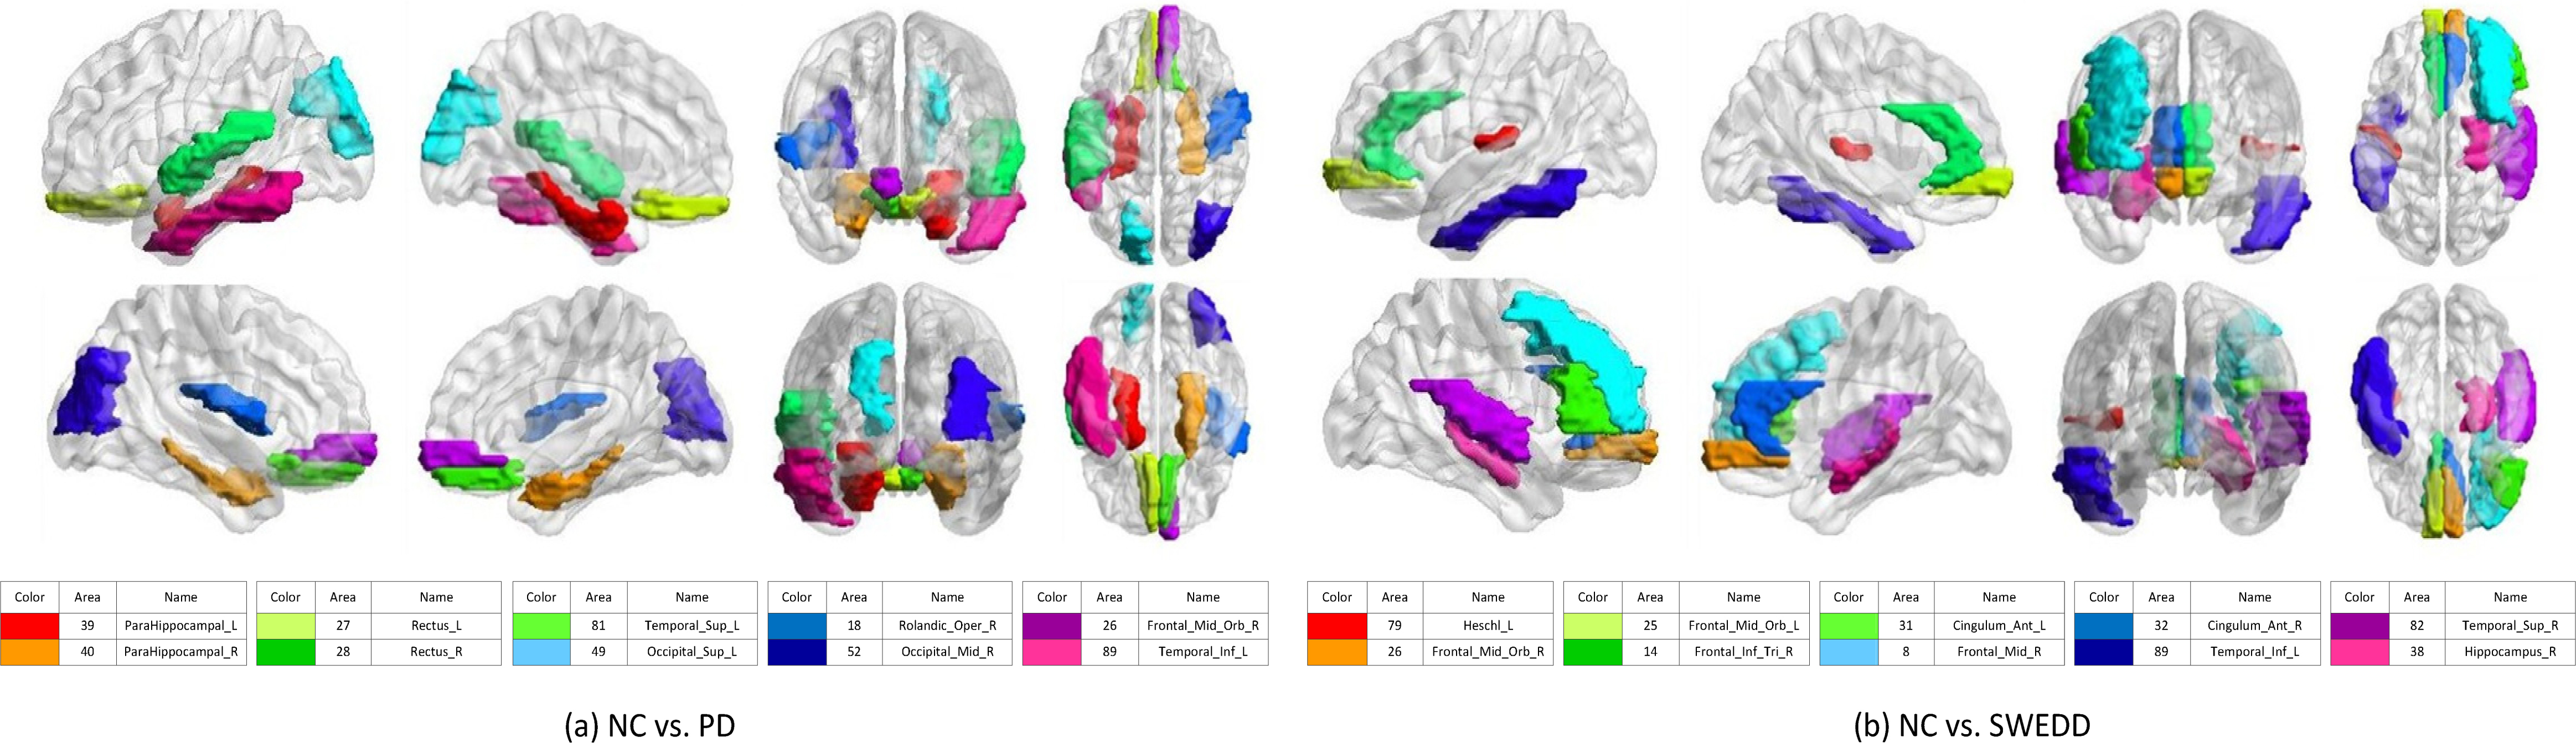 Top 10 discriminative brain regions gained from proposed method for (a) NC vs. PD, and NC vs. SWEDD. Brain regions are color-coded. Moreover, suffix ‘_L’ means left brains, suffix ‘_R’ means right brains, and different colors show different brain regions.